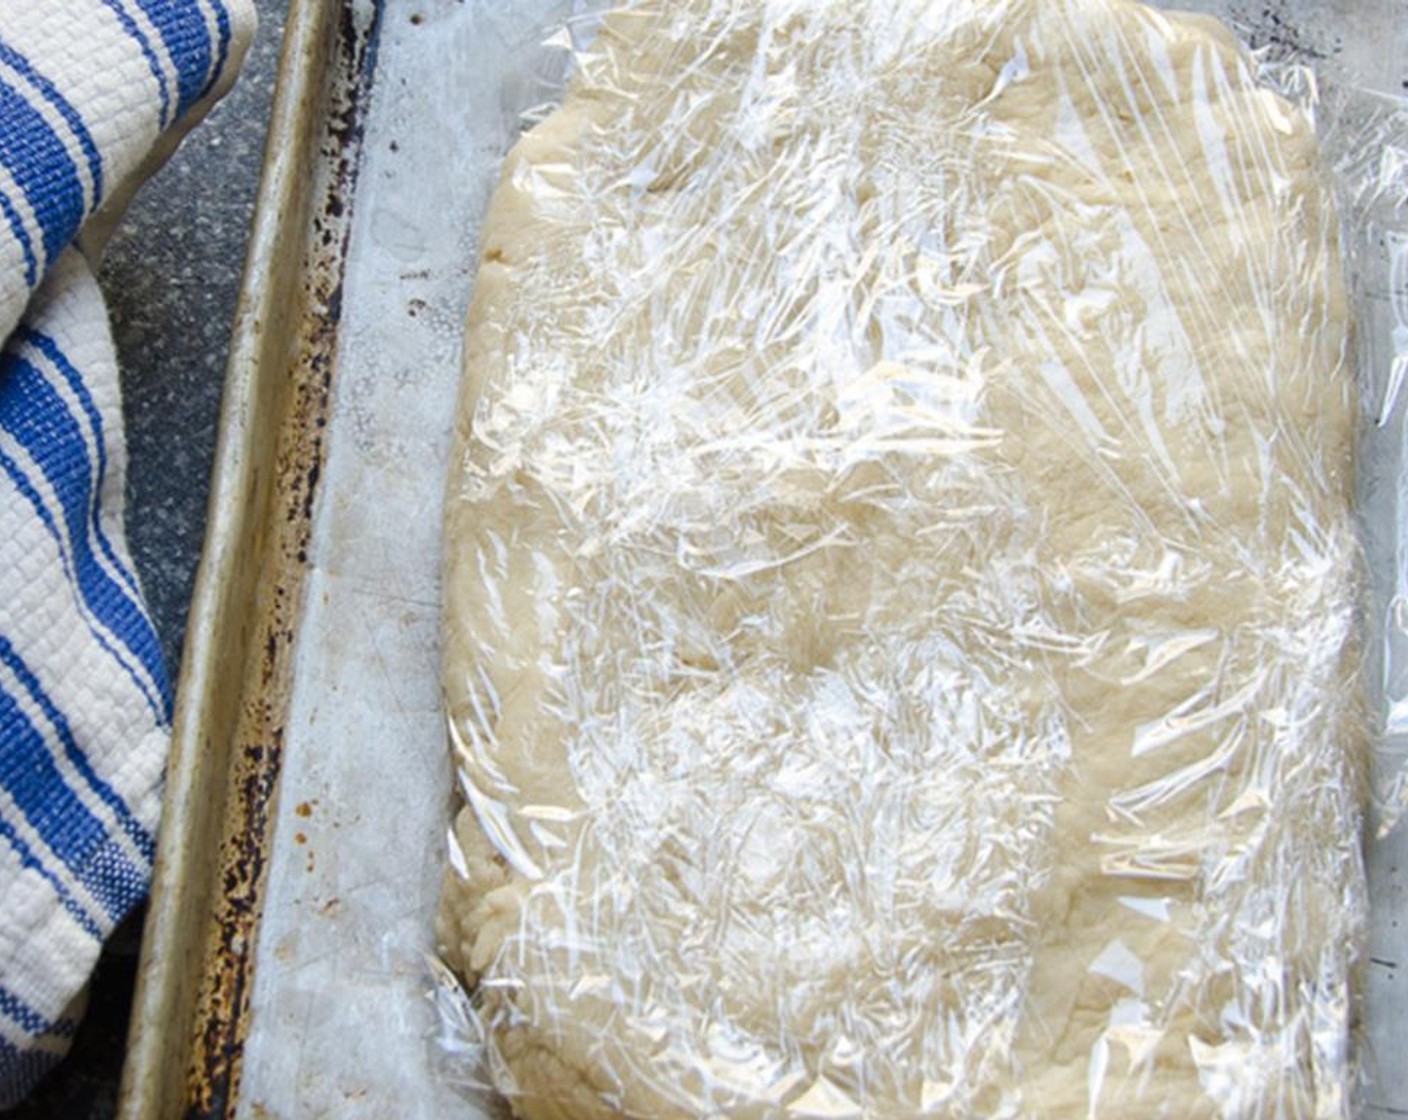 step 4 Turn out onto a lightly floured surface and gather the dough together. Knead gently once or twice, just enough to bring the dough together. Shape into a flat rectangle and chill, wrapped in plastic wrap for at least 1 hour.